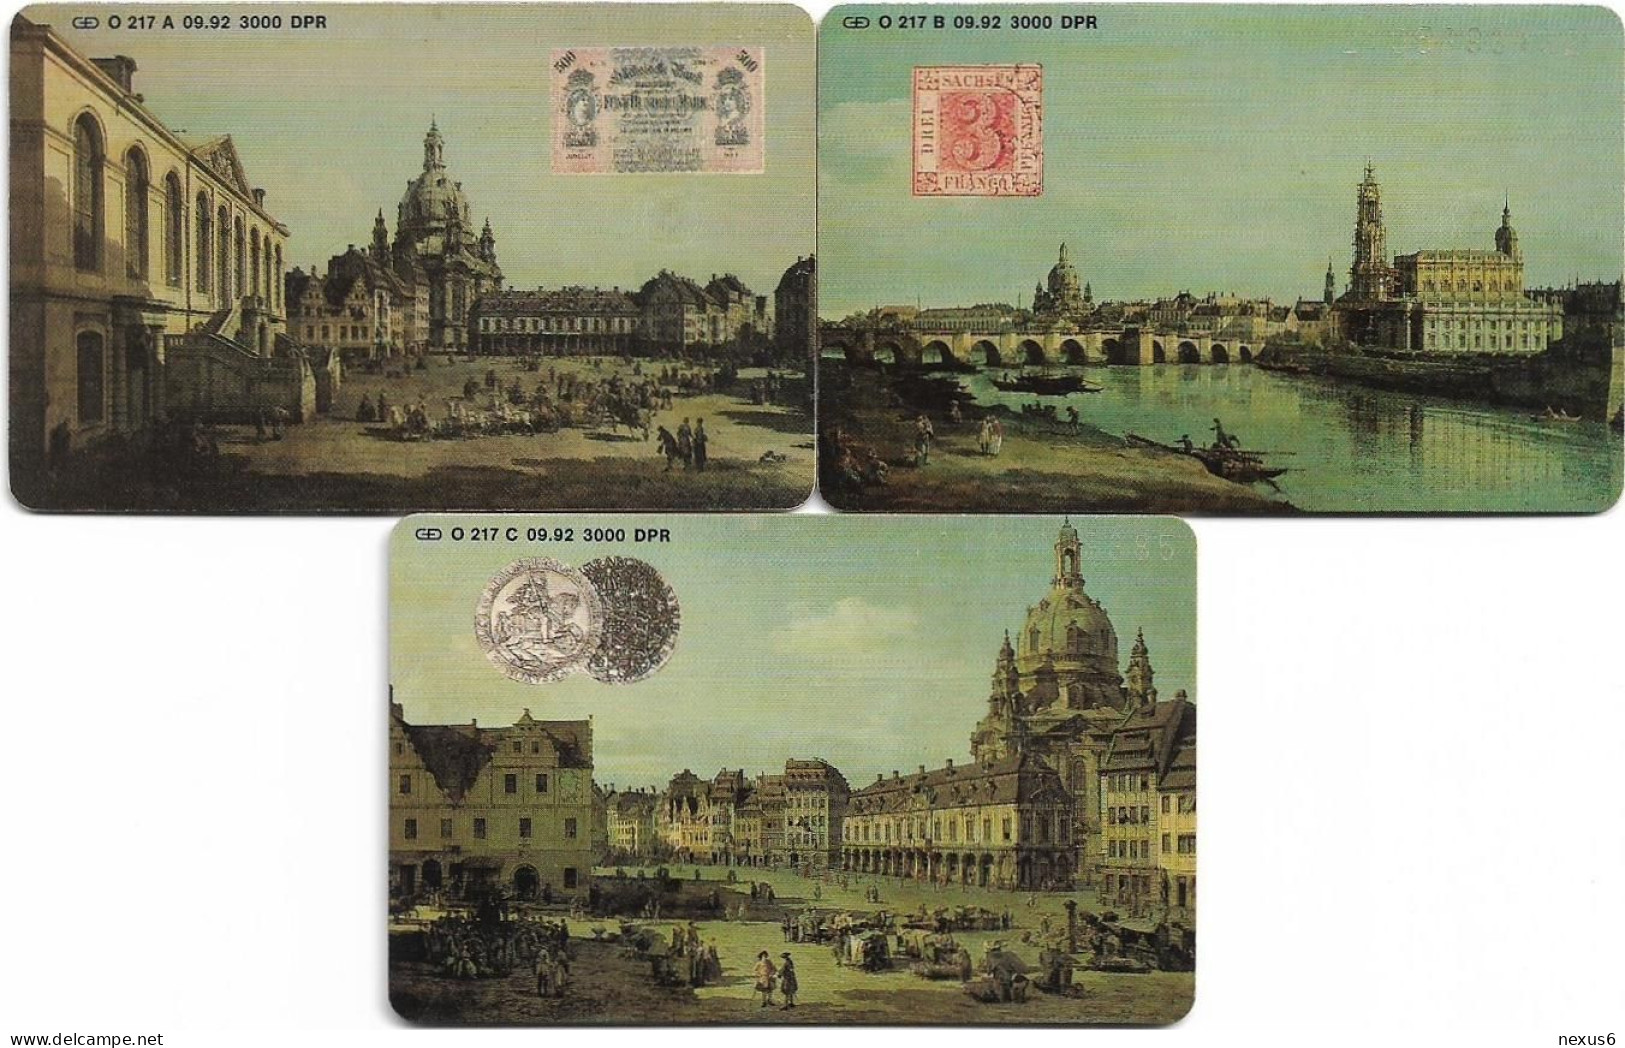 Germany - PCP Dresden Complete Set Of 4 Cards - O 0217A-C - 09.1992, 6DM, 3.000ex, Used - O-Series : Customers Sets